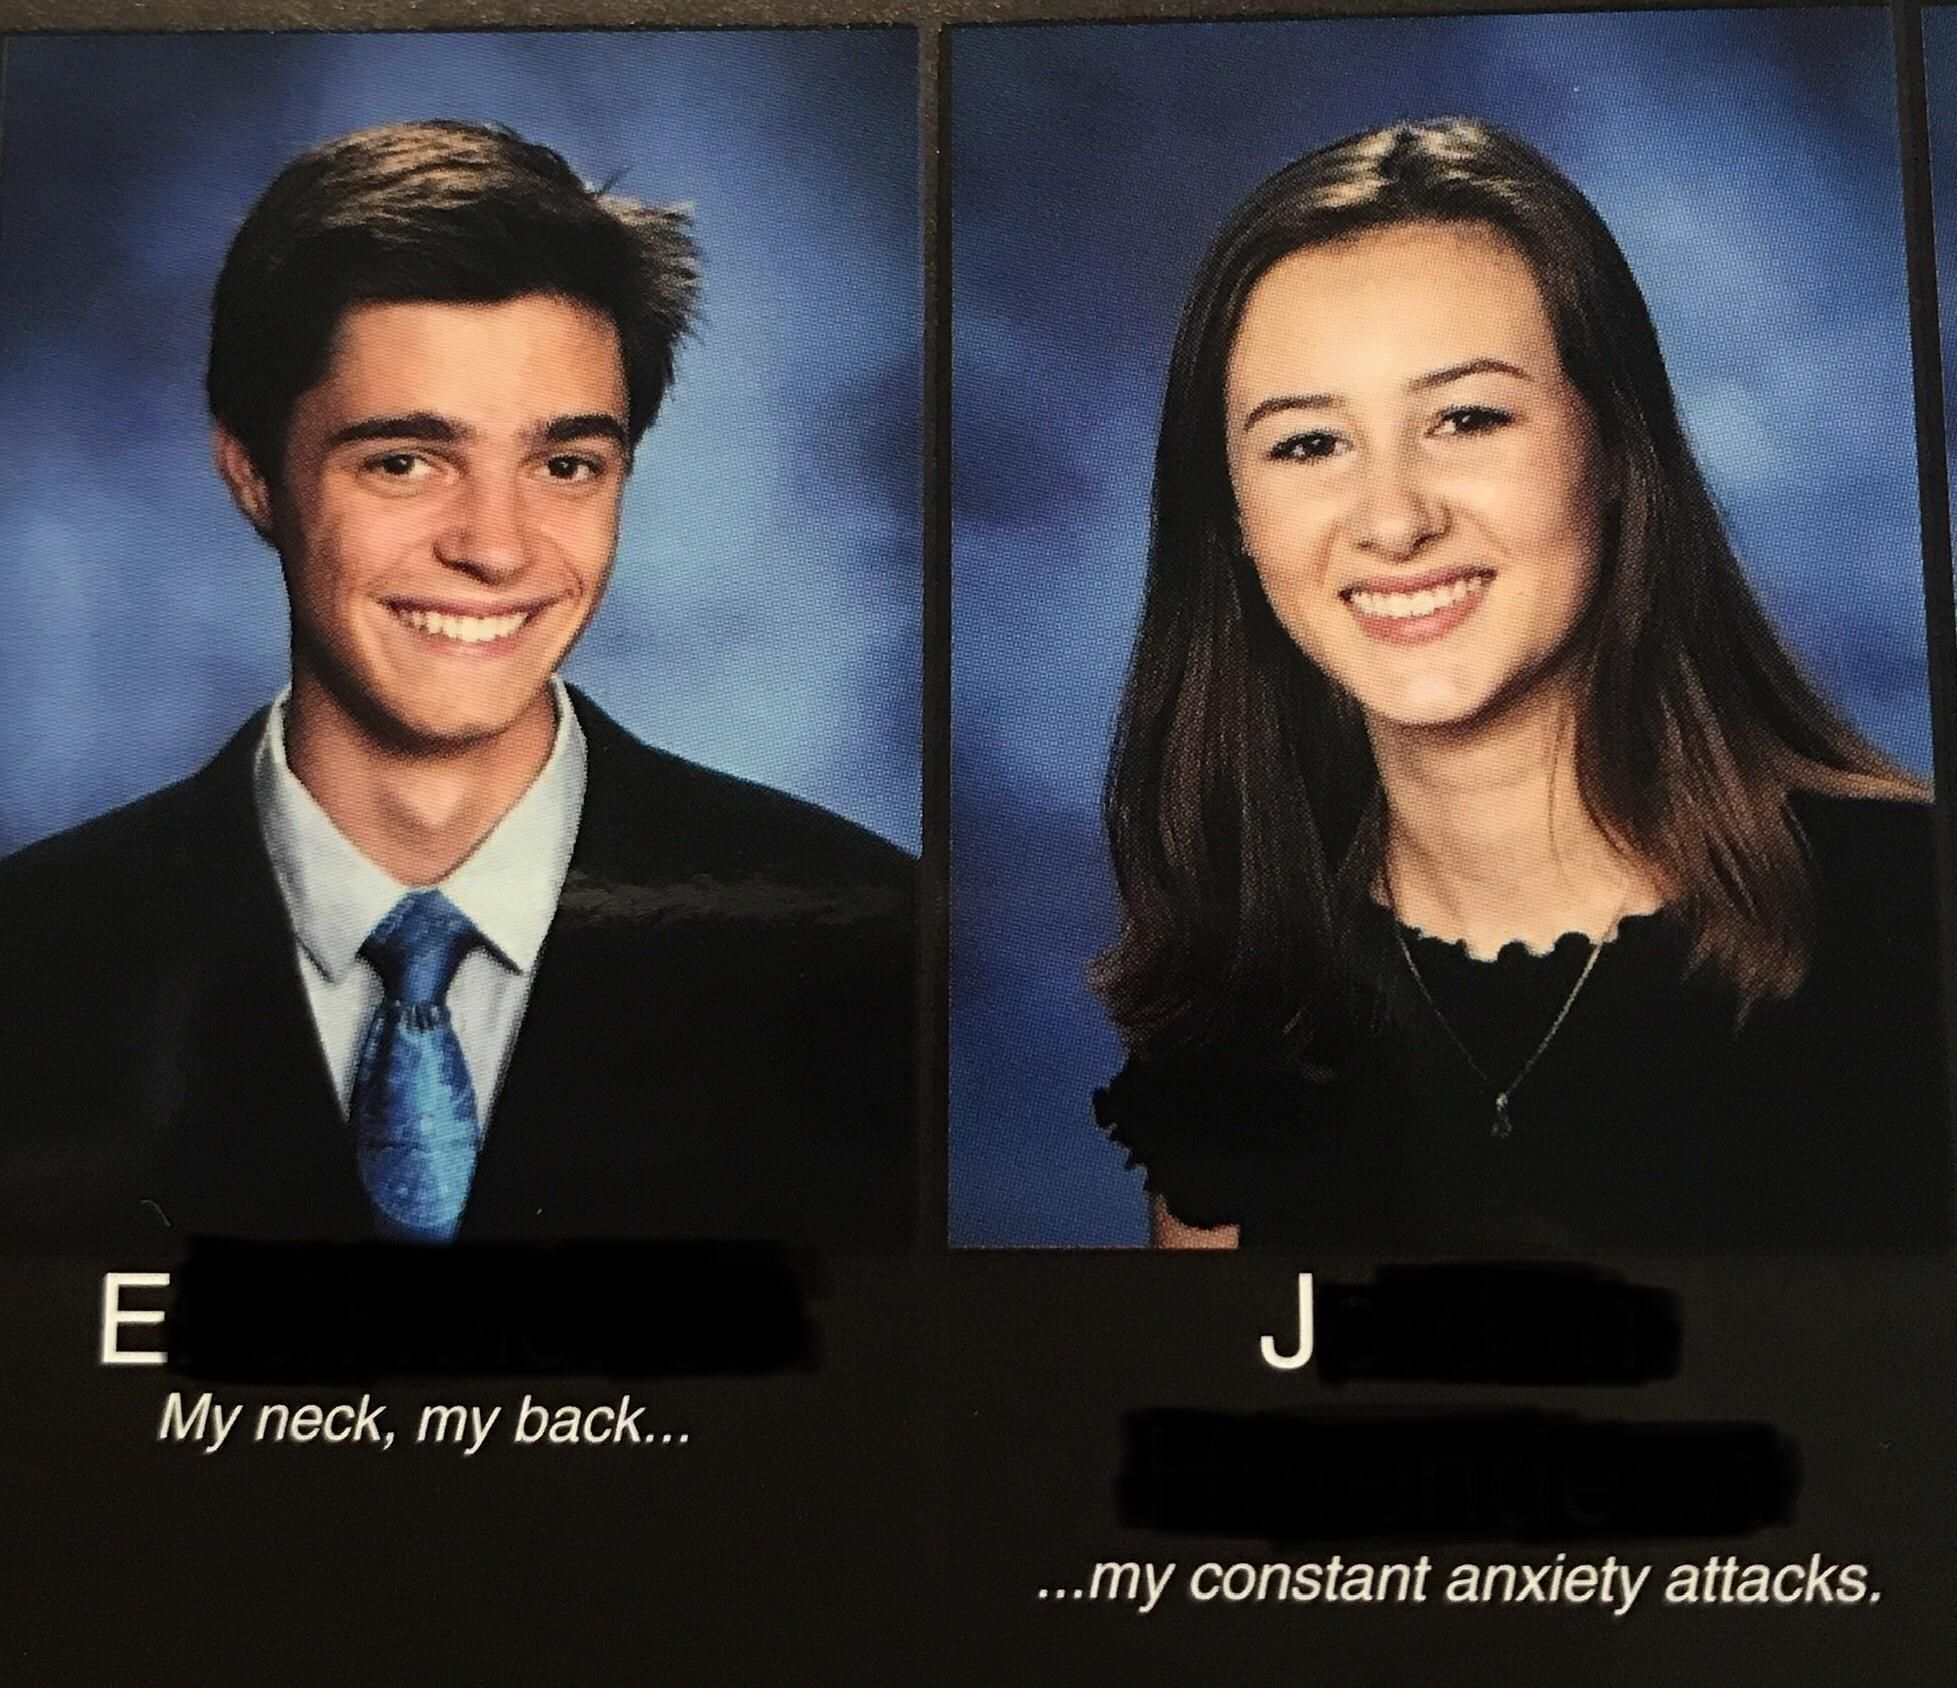 These connected senior quotes